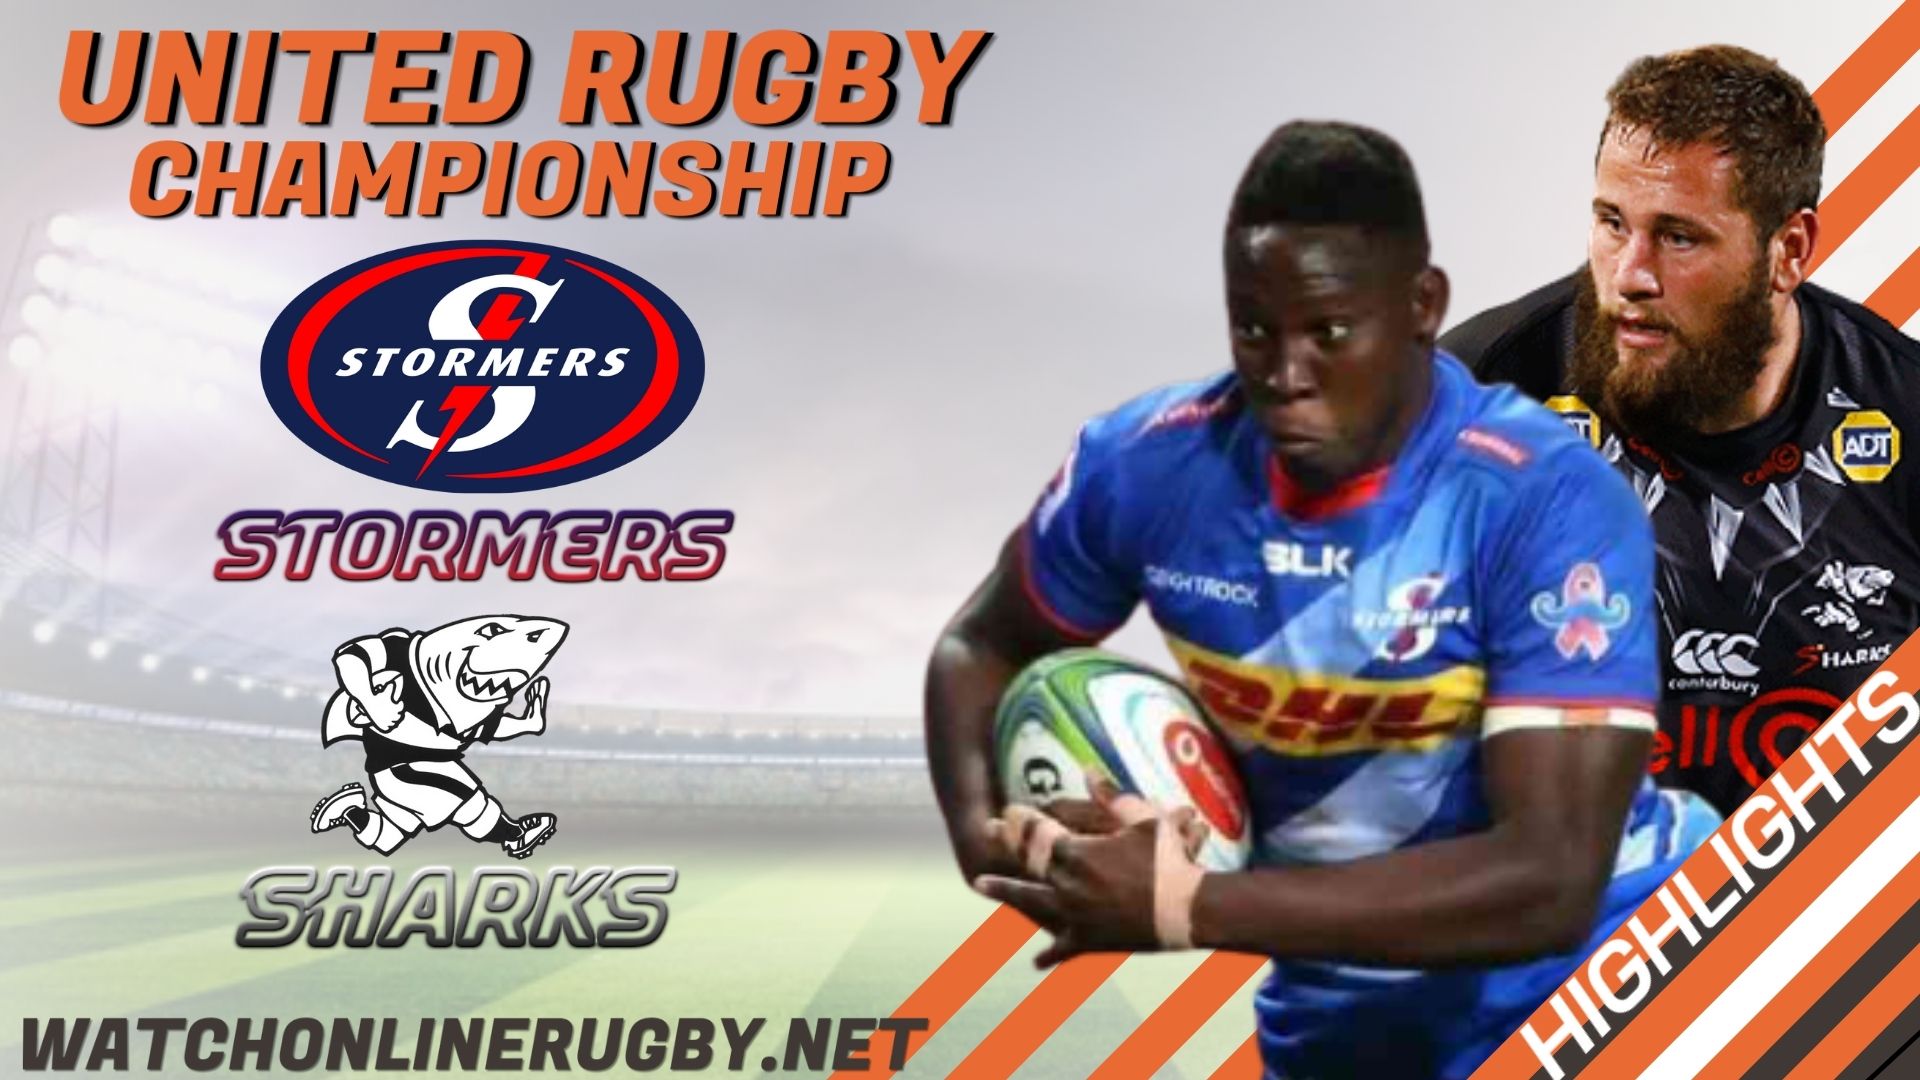 Sharks Vs Stormers United Rugby Championship 2022 RD 11